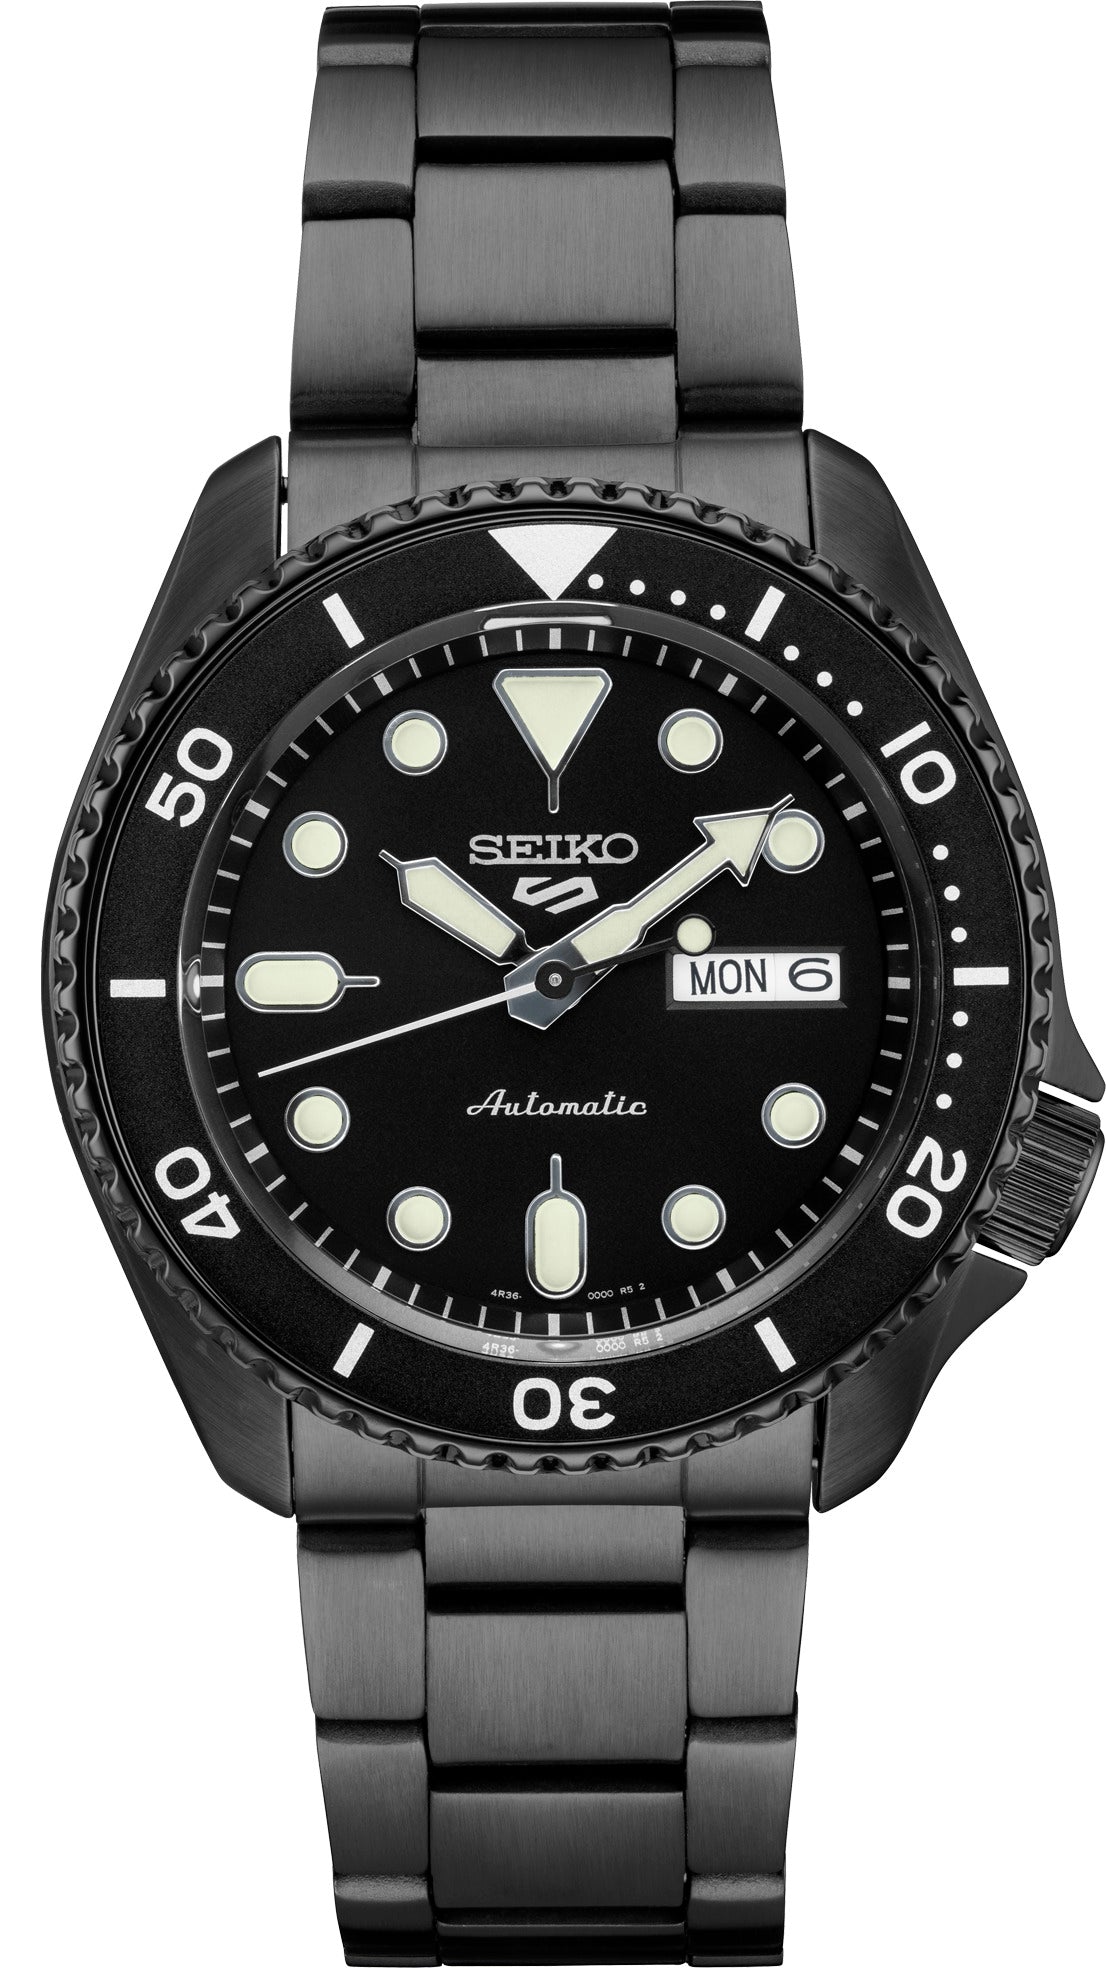 Seiko 5 Sports Men's Stainless Watch in color Gunmetal, Black from the front view